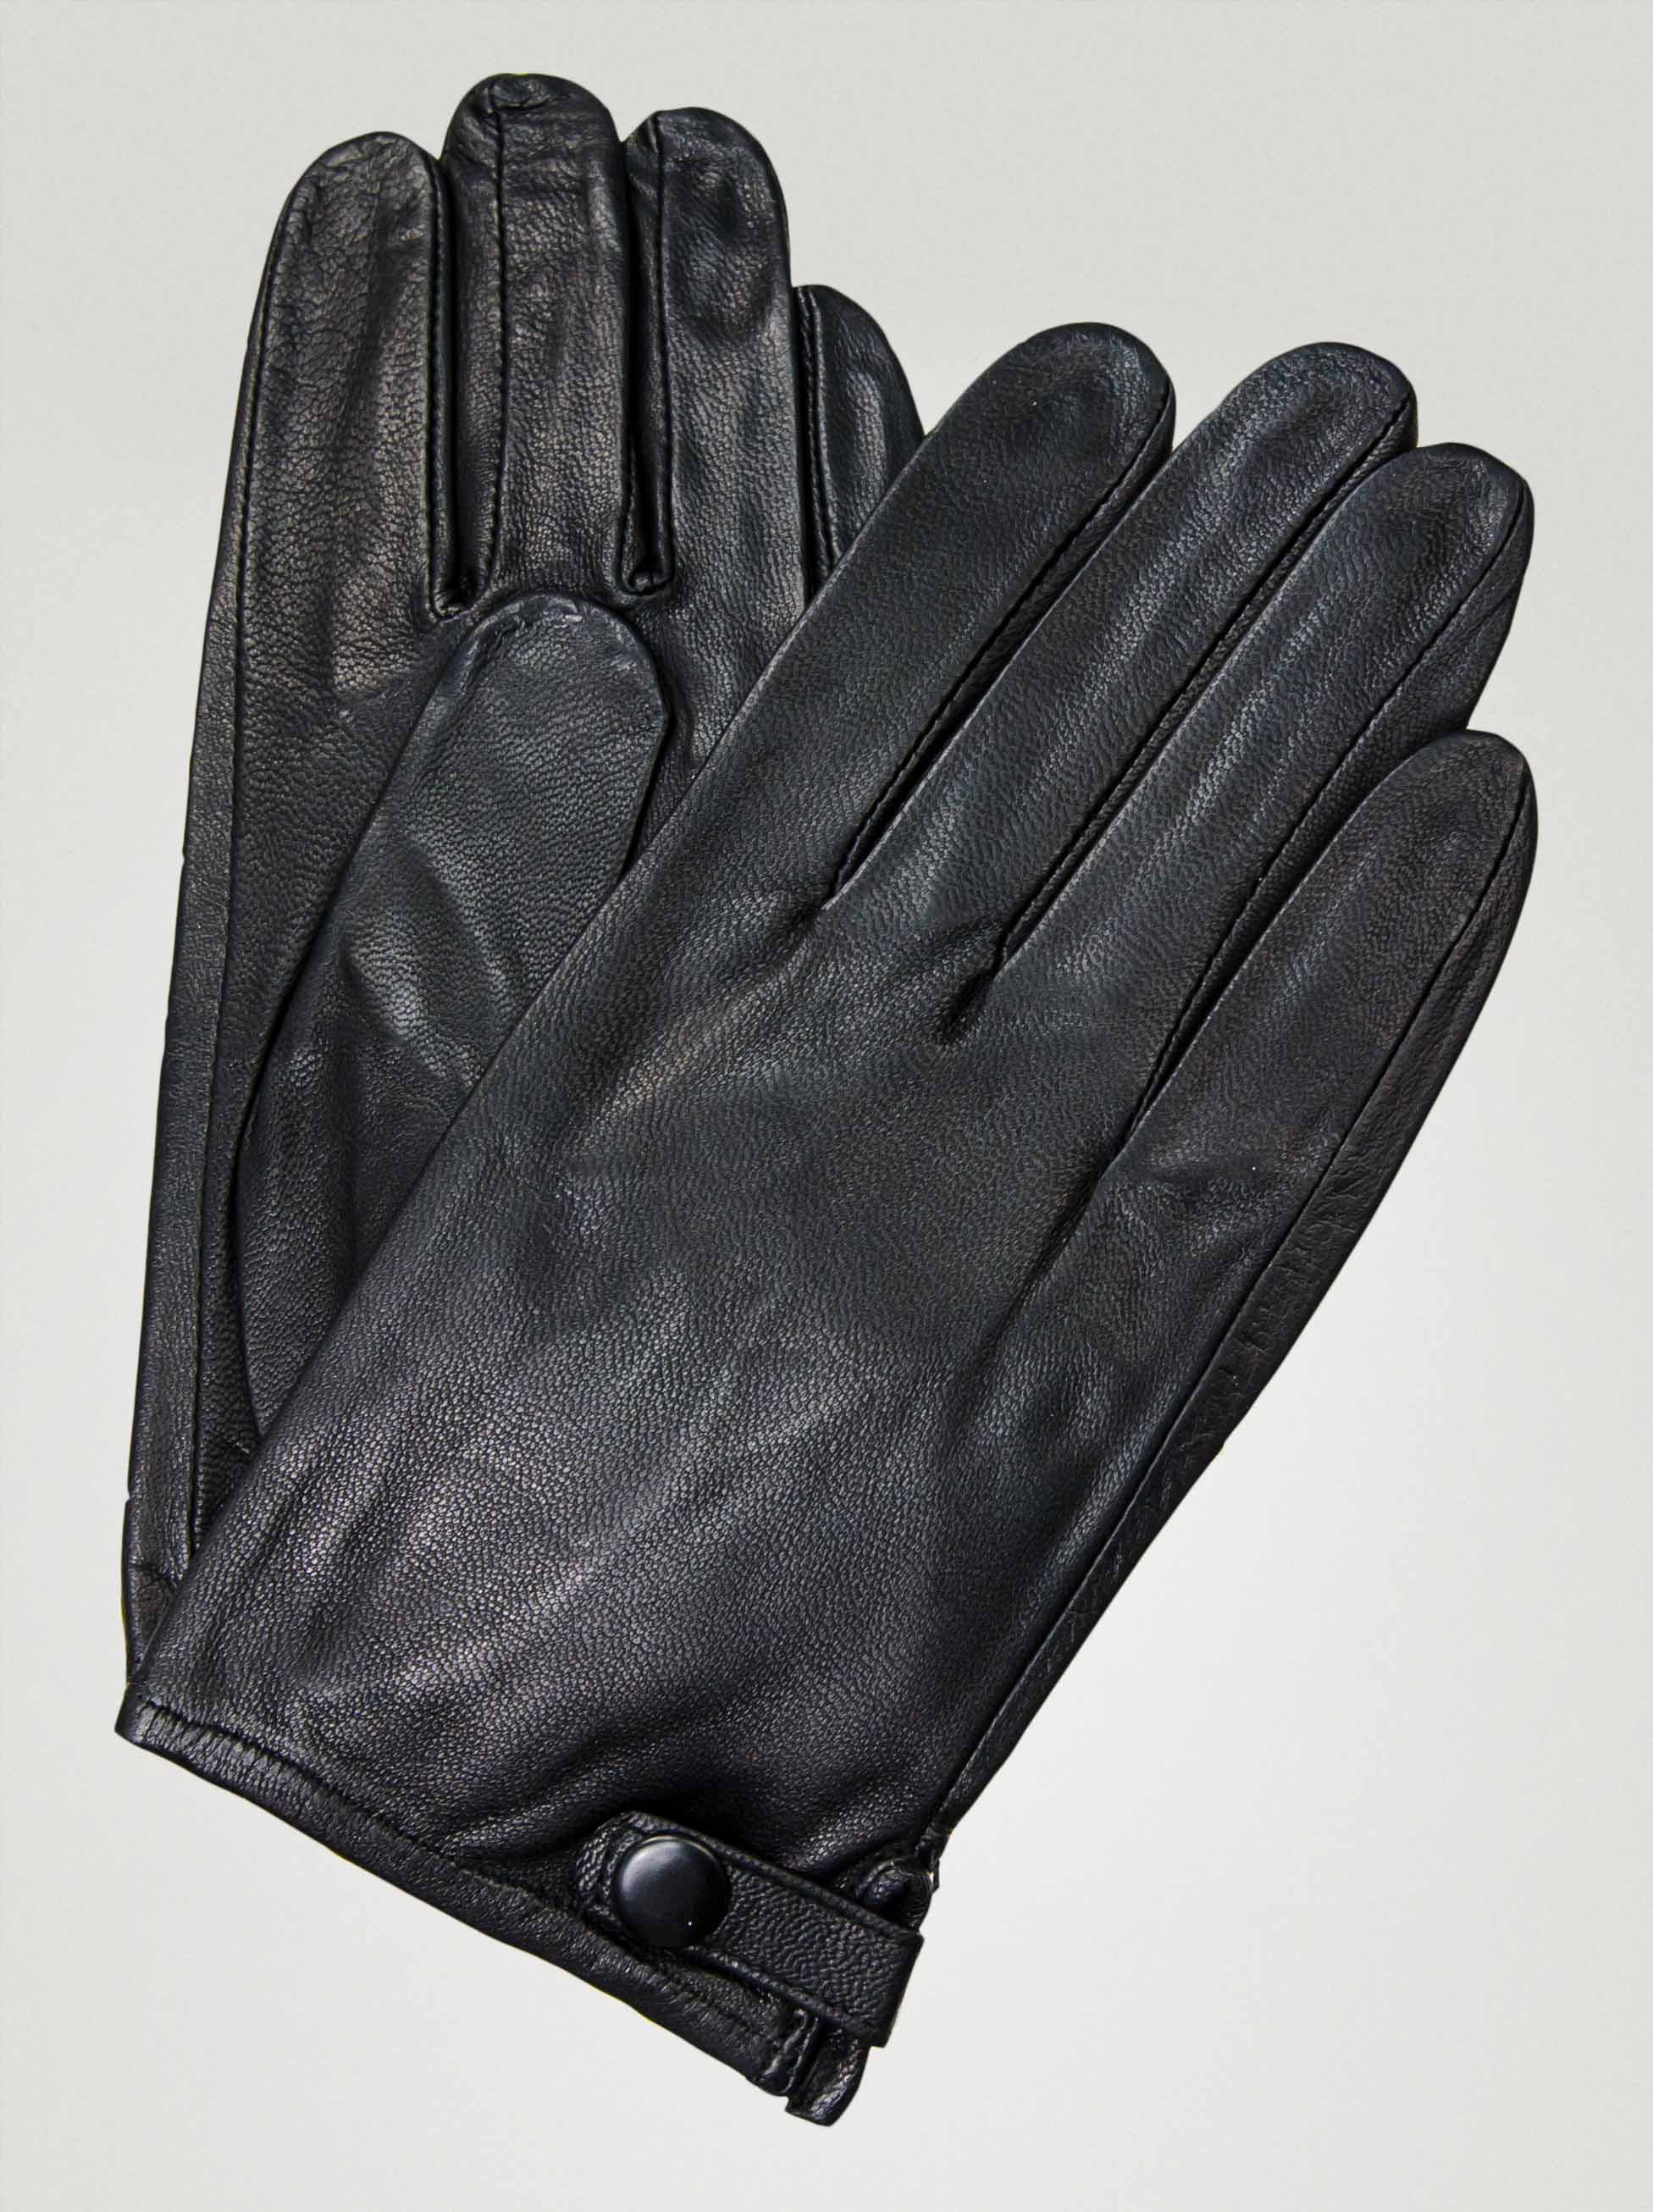 Leather gloves l - Allora image 1